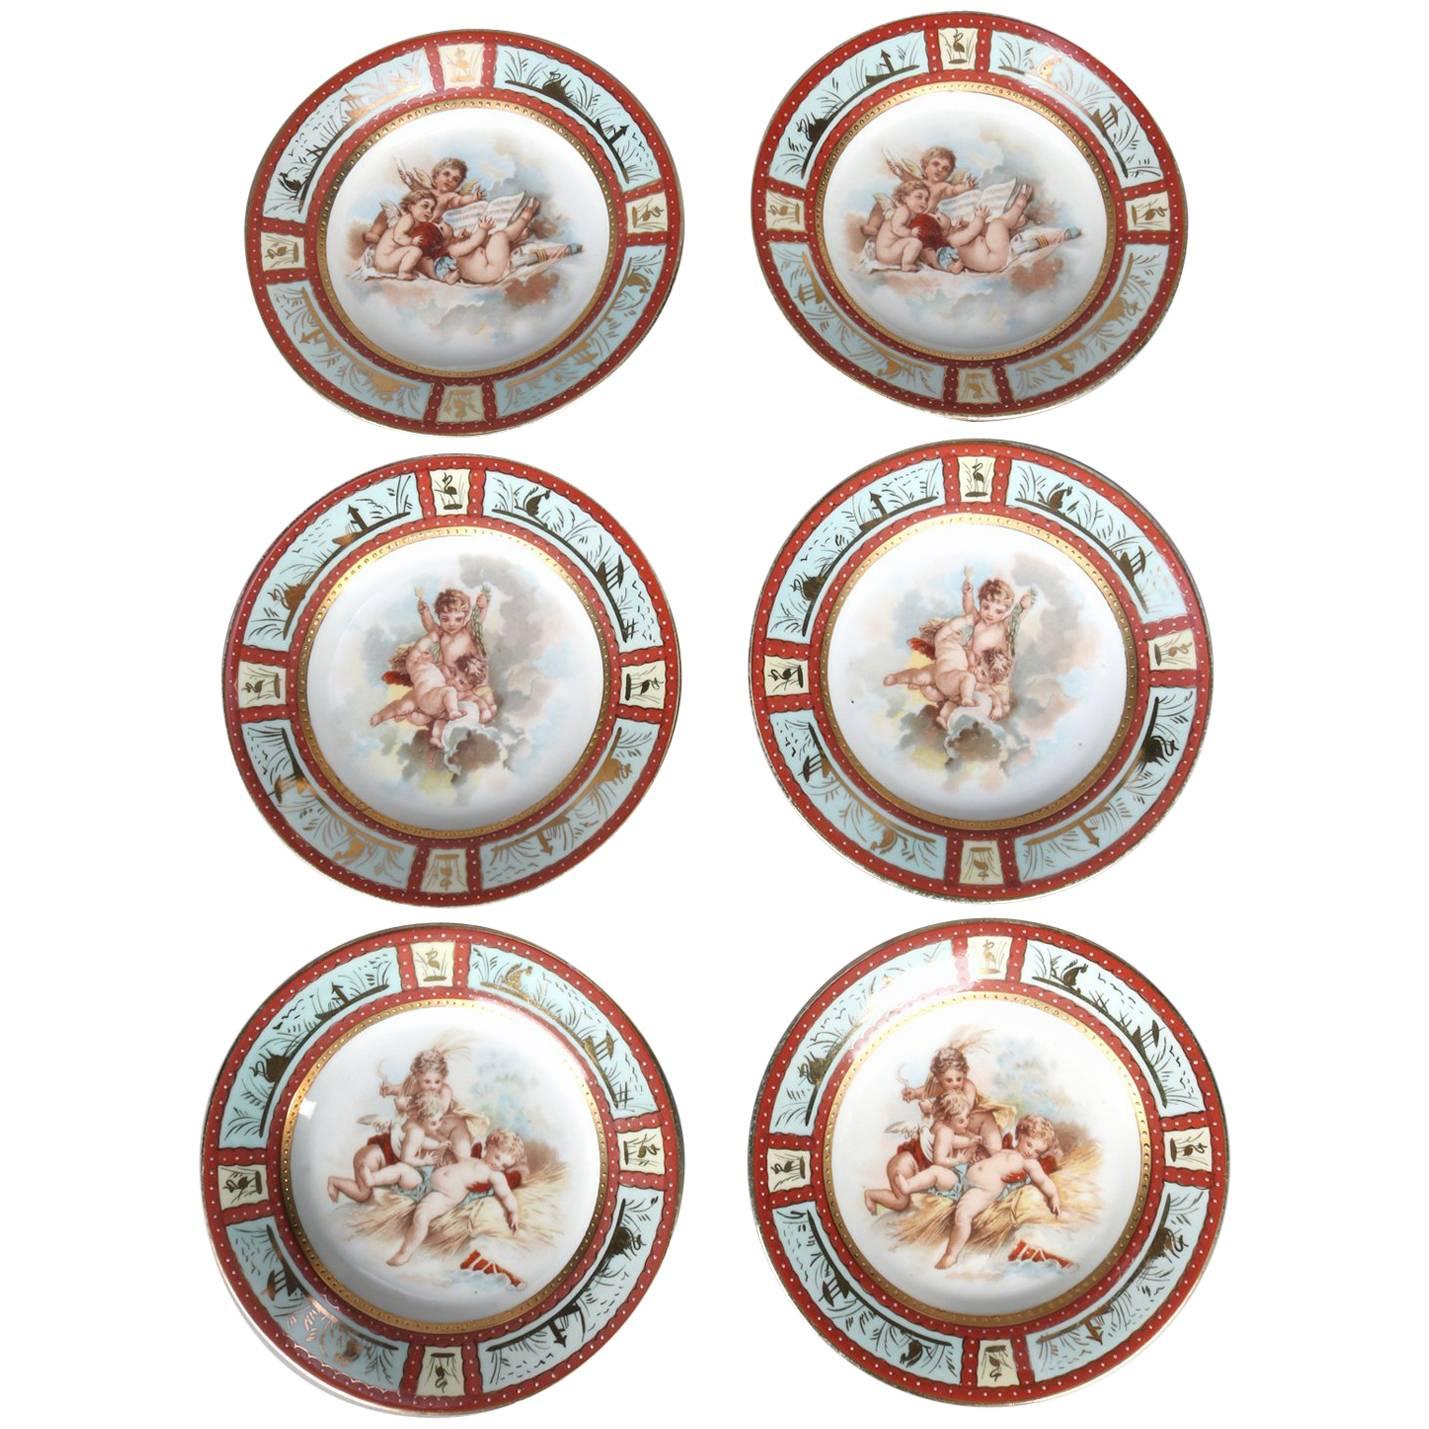 Six Antique Royal Vienna Classical Hand-Painted and Gilt Porcelain Plates